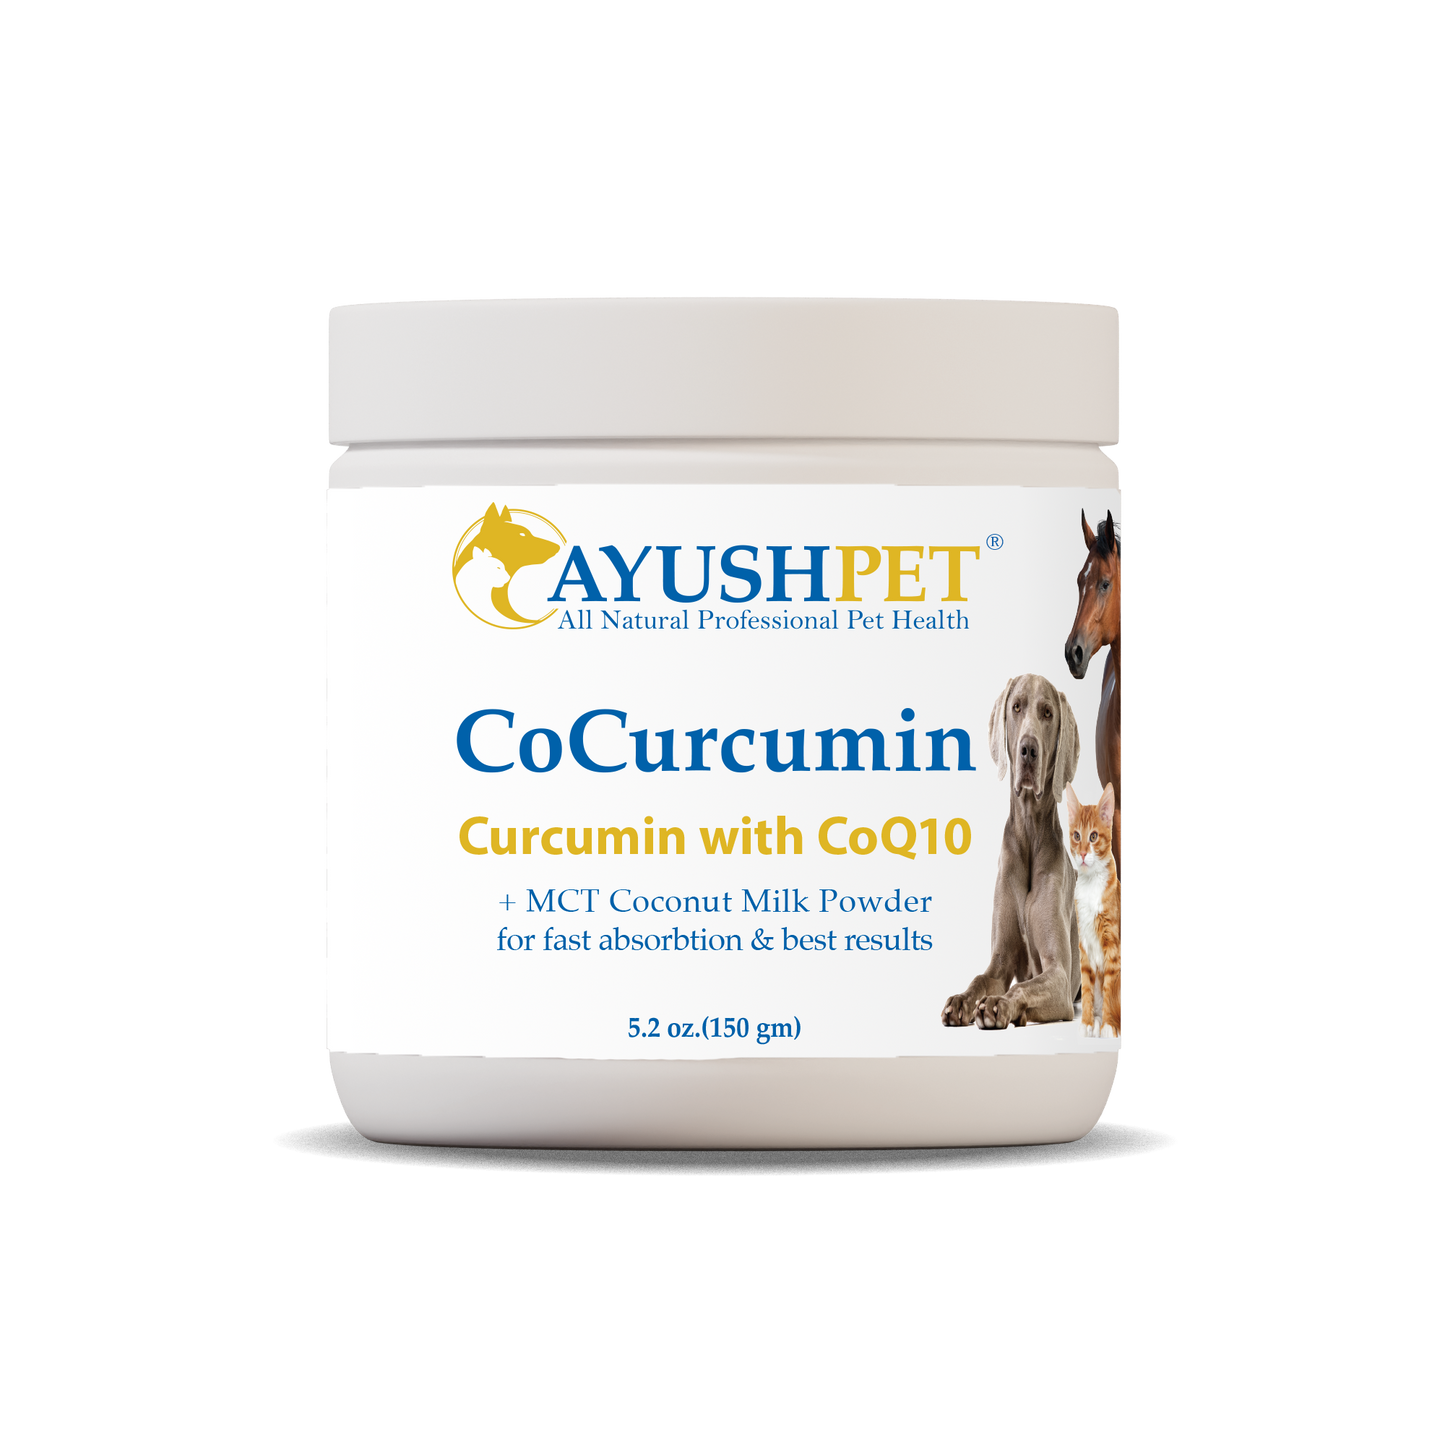 Pet Cocurcumin Daily Health + Wellness by ruved herbal supplements and ayush herbs